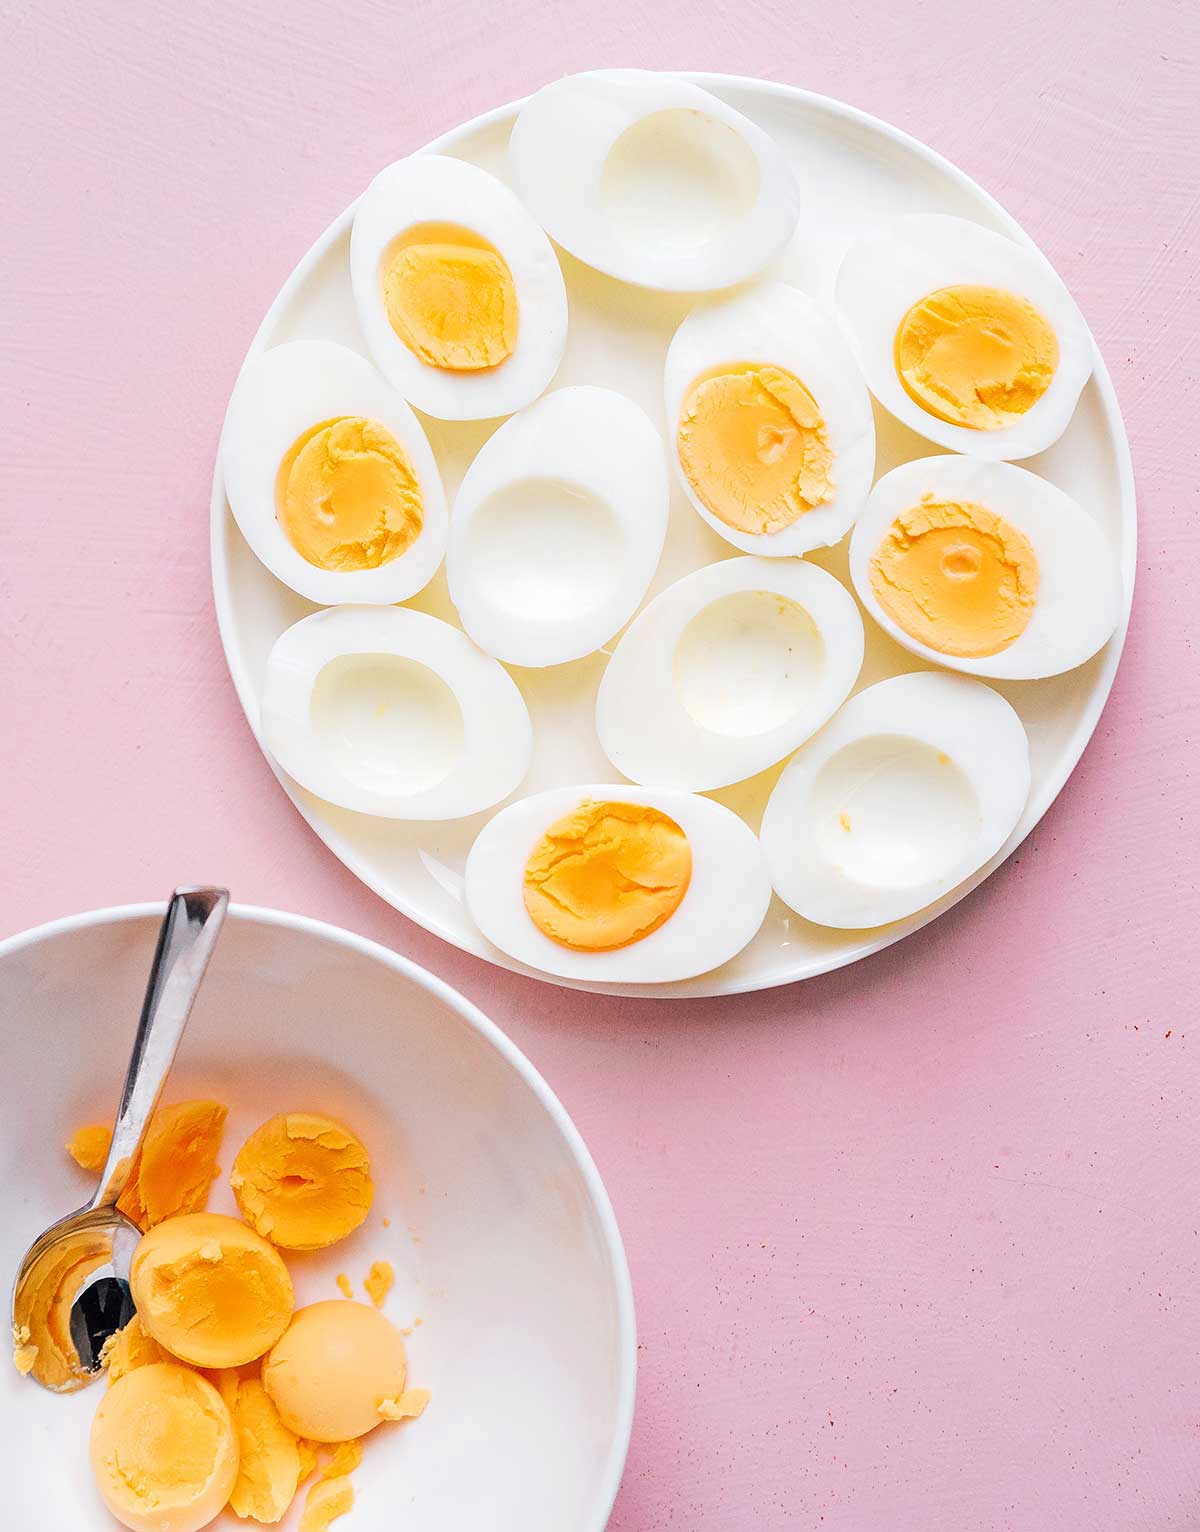 Eleven egg white halves on a plate next to a bowl of egg yolks